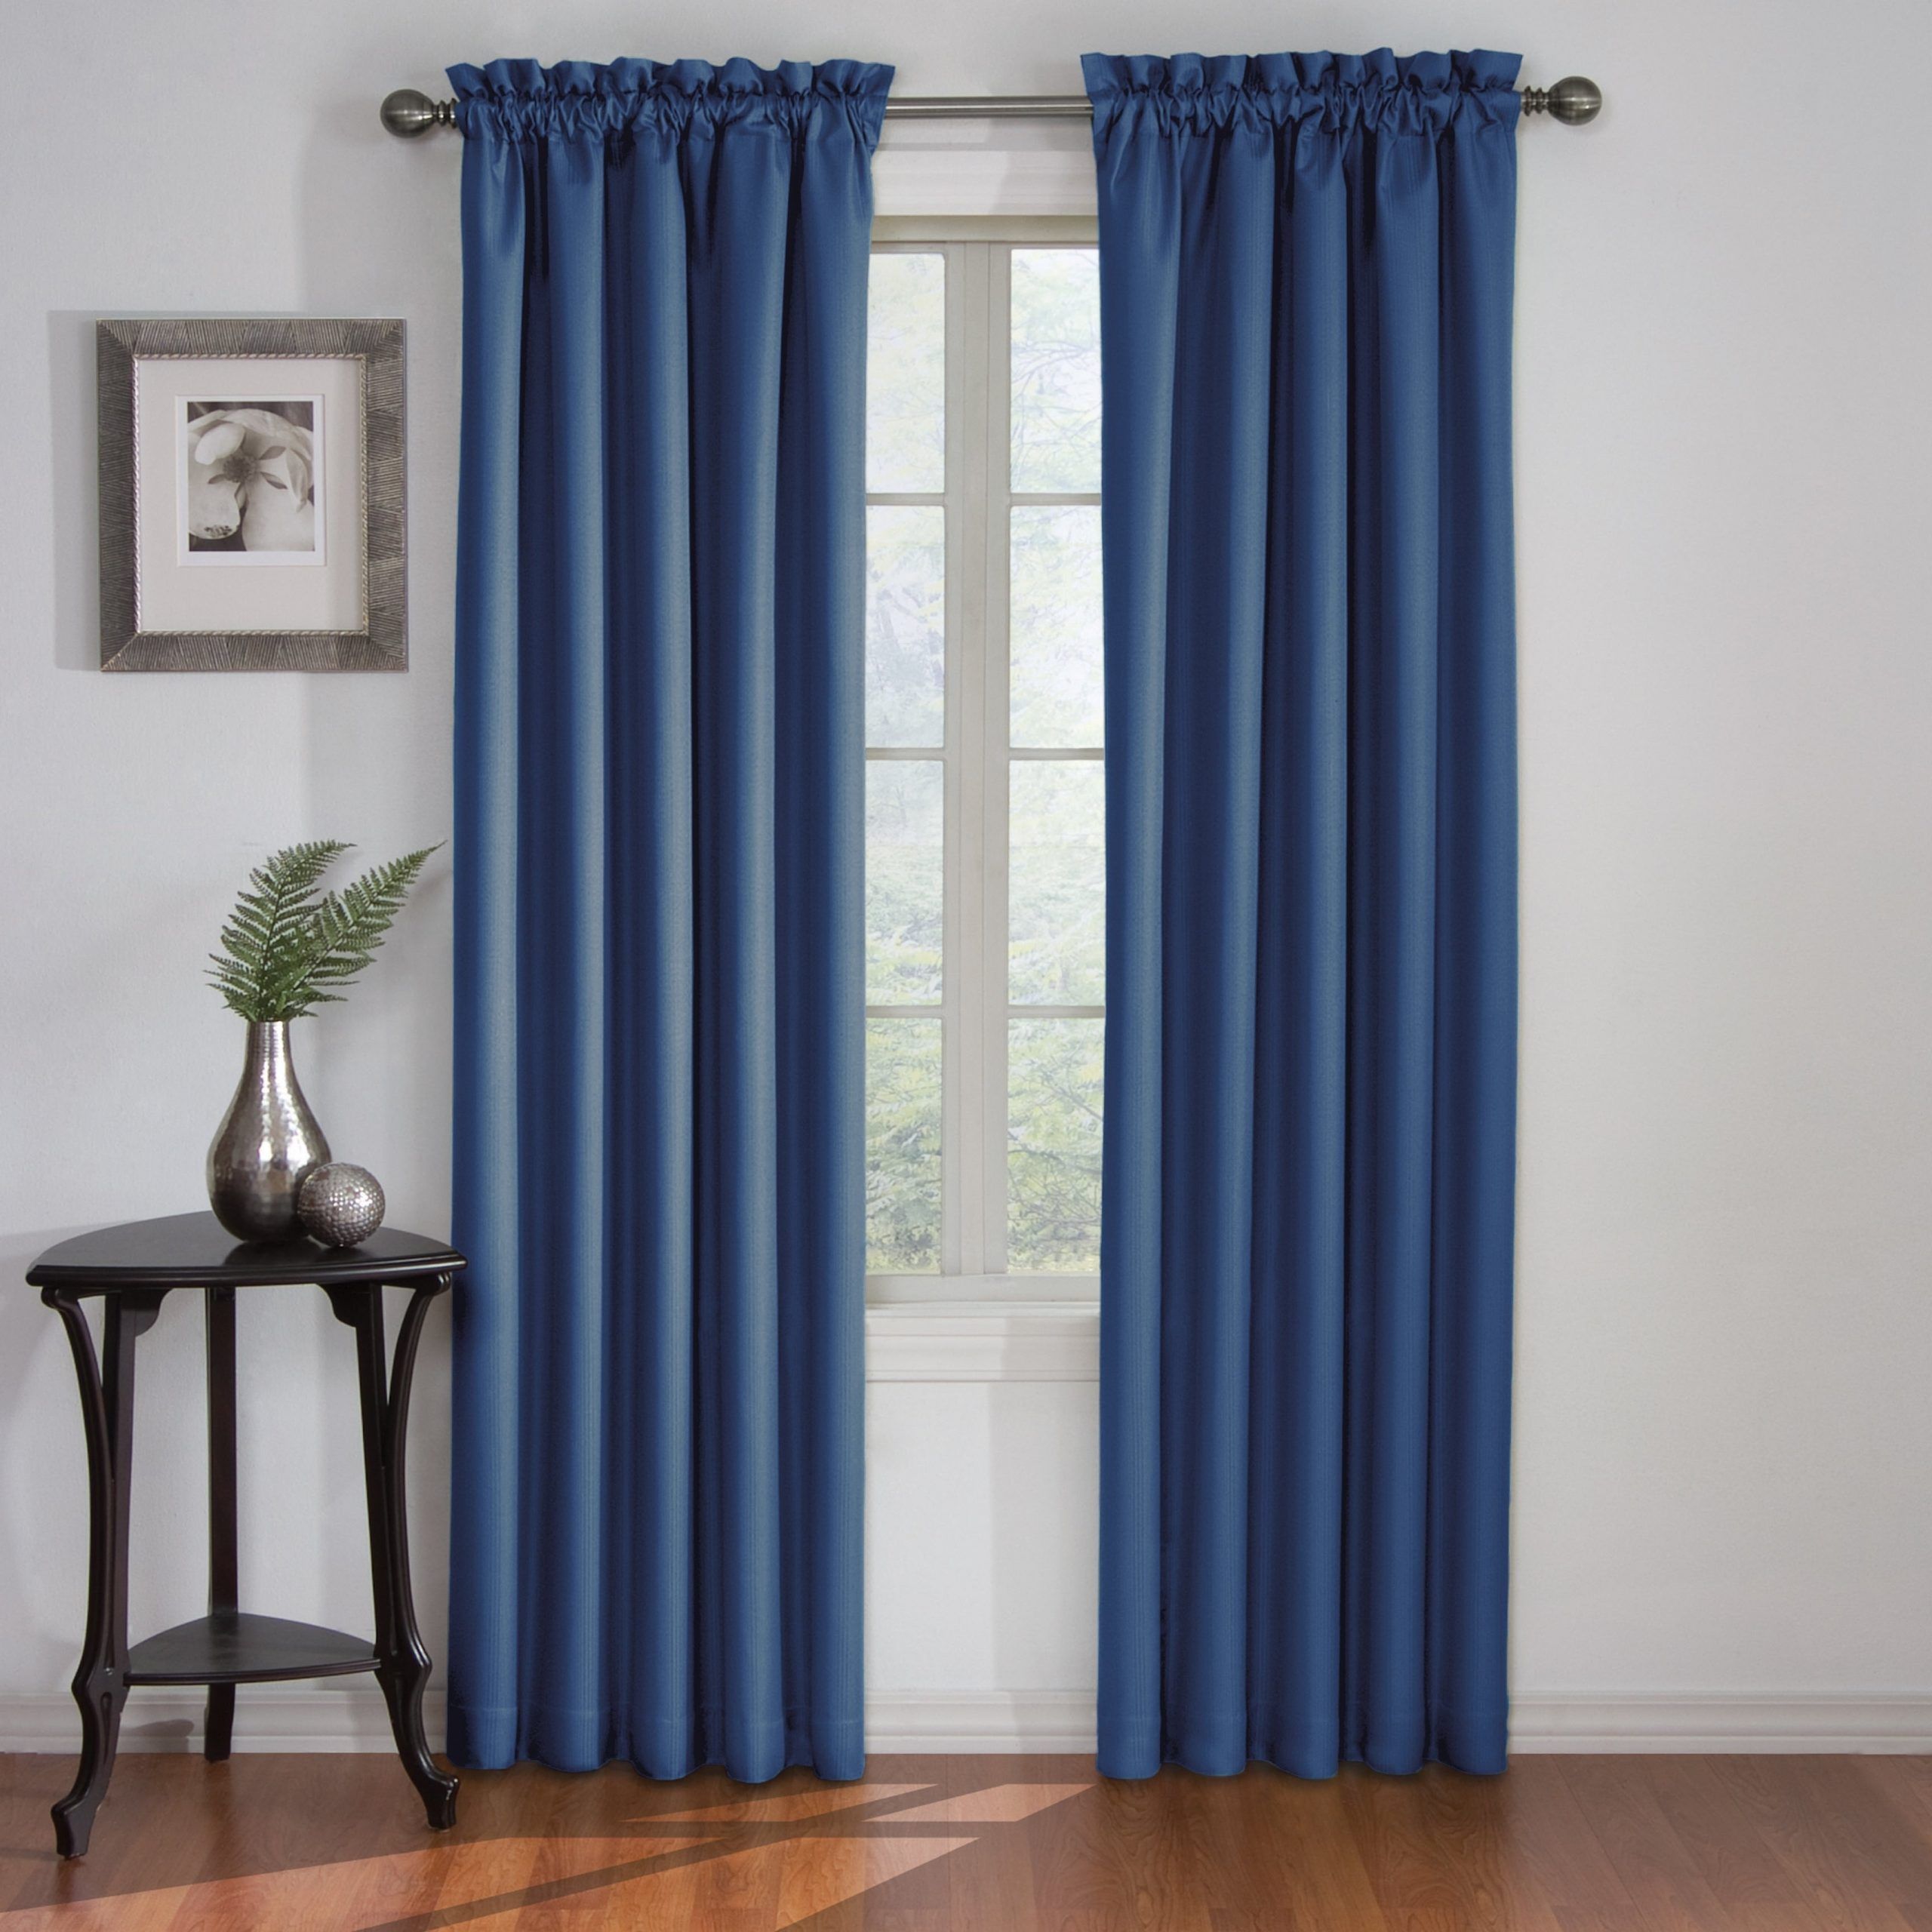 Trendy Eclipse Corinne Thermaback Curtain Panels With Regard To Eclipse Corinne Thermaback Curtain Panel (View 1 of 20)